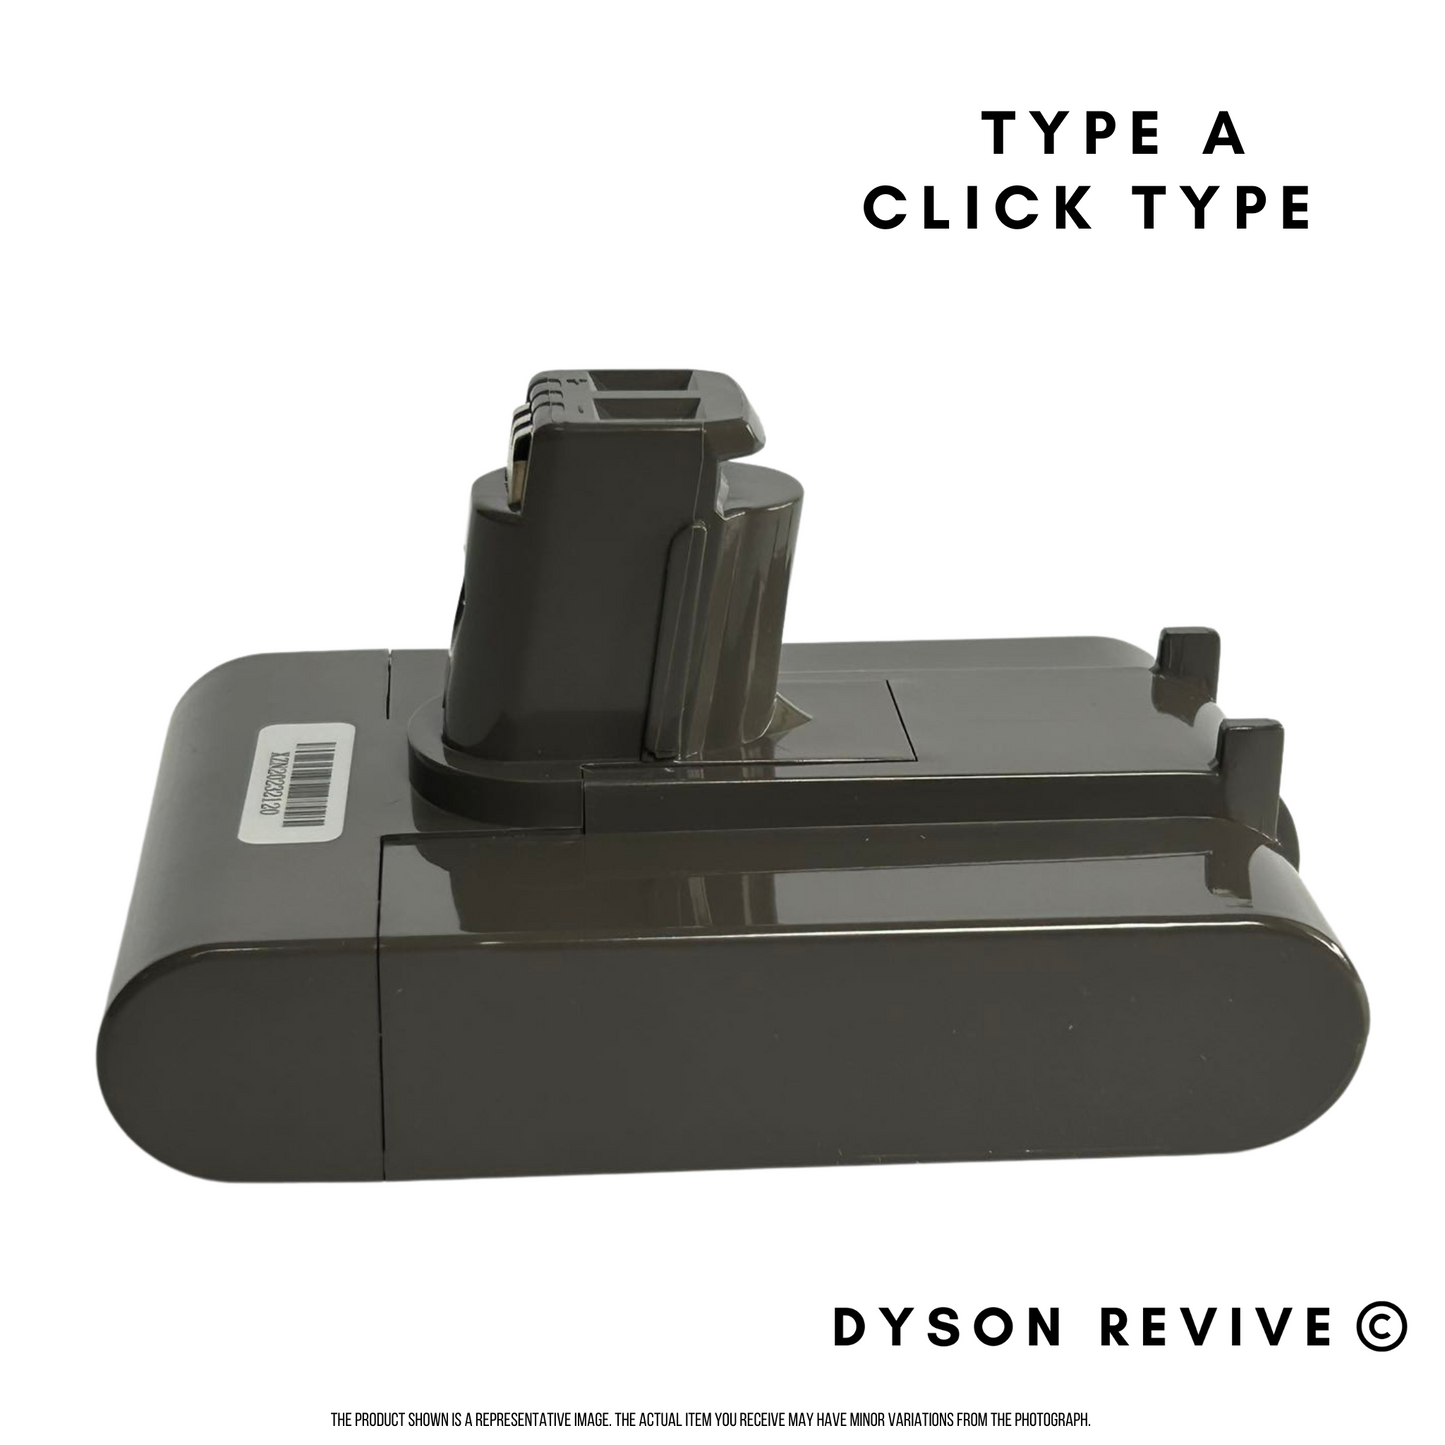 Type A Brand New Replacement Battery For Dyson DC30, DC31, DC34, DC35, DC44 & DC45 - Dyson Revive